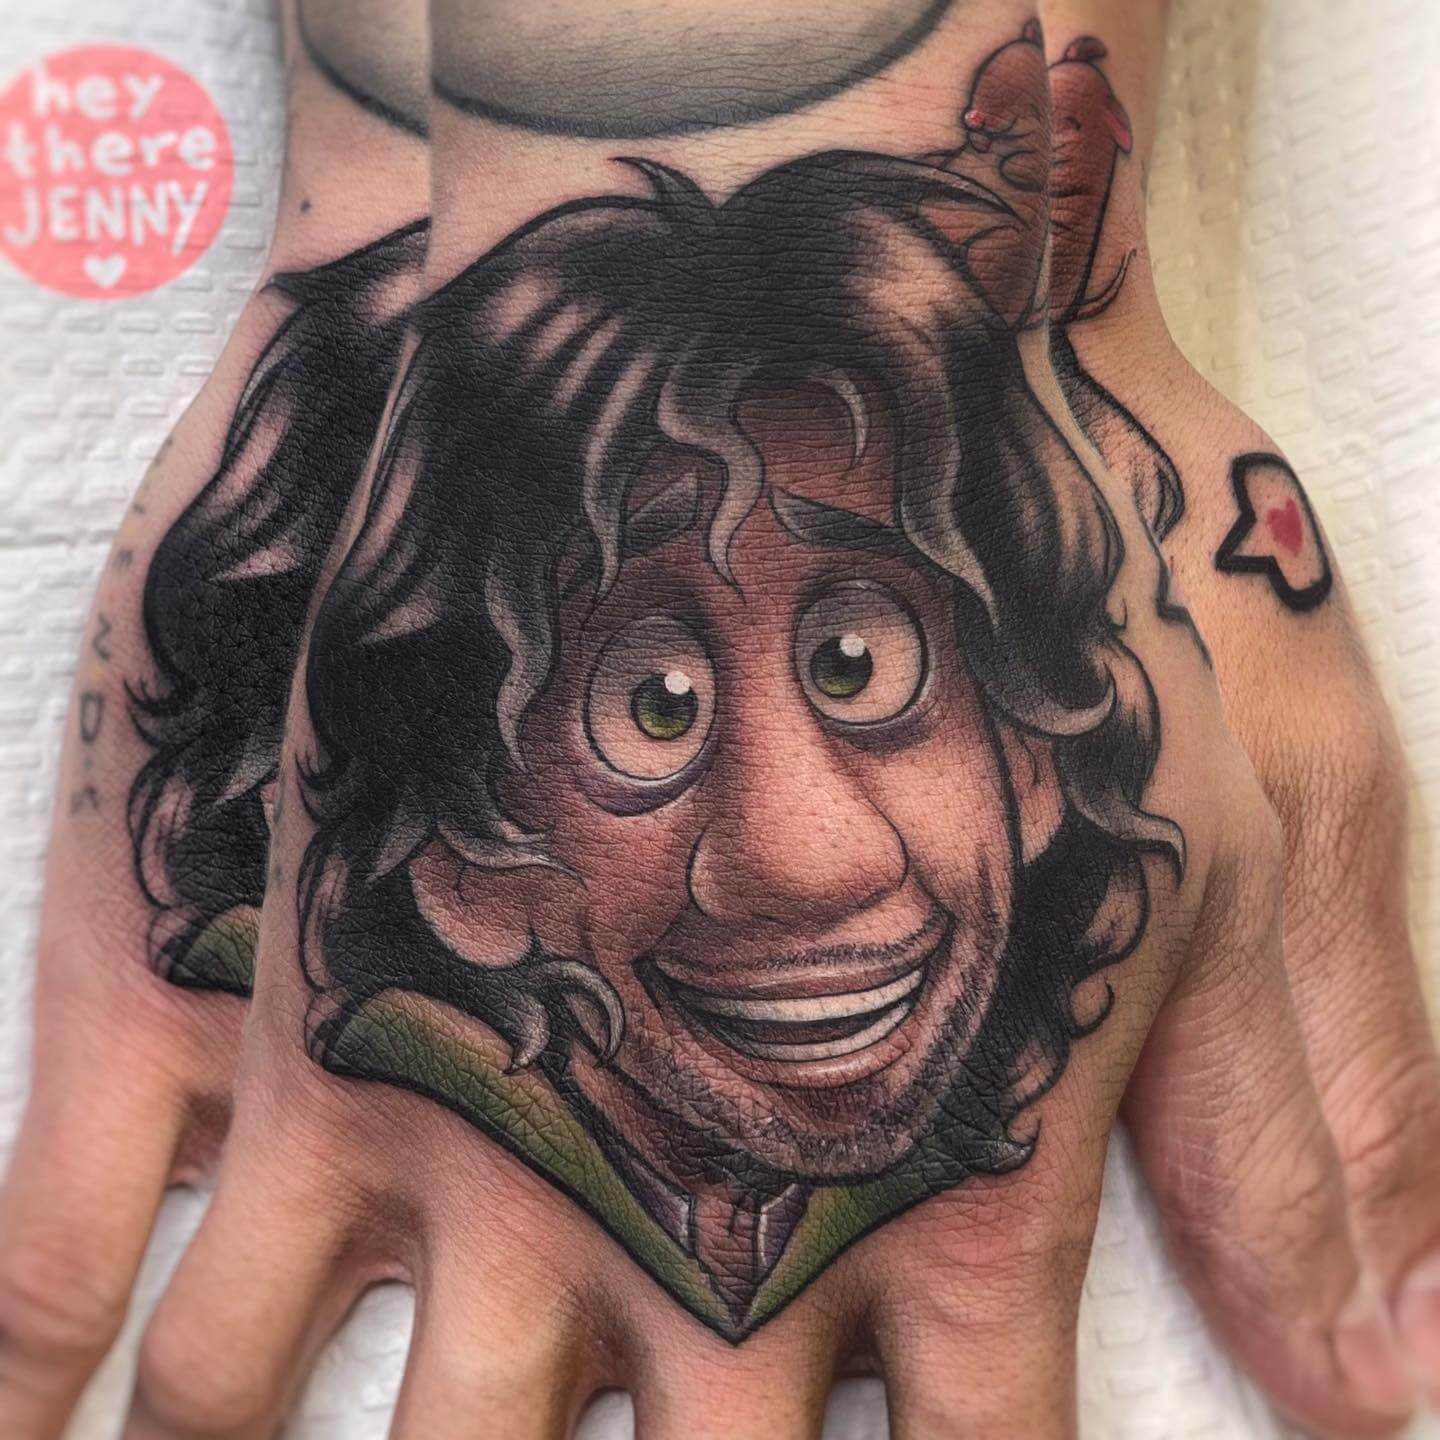 Hand Tattoo with Bruno's Face